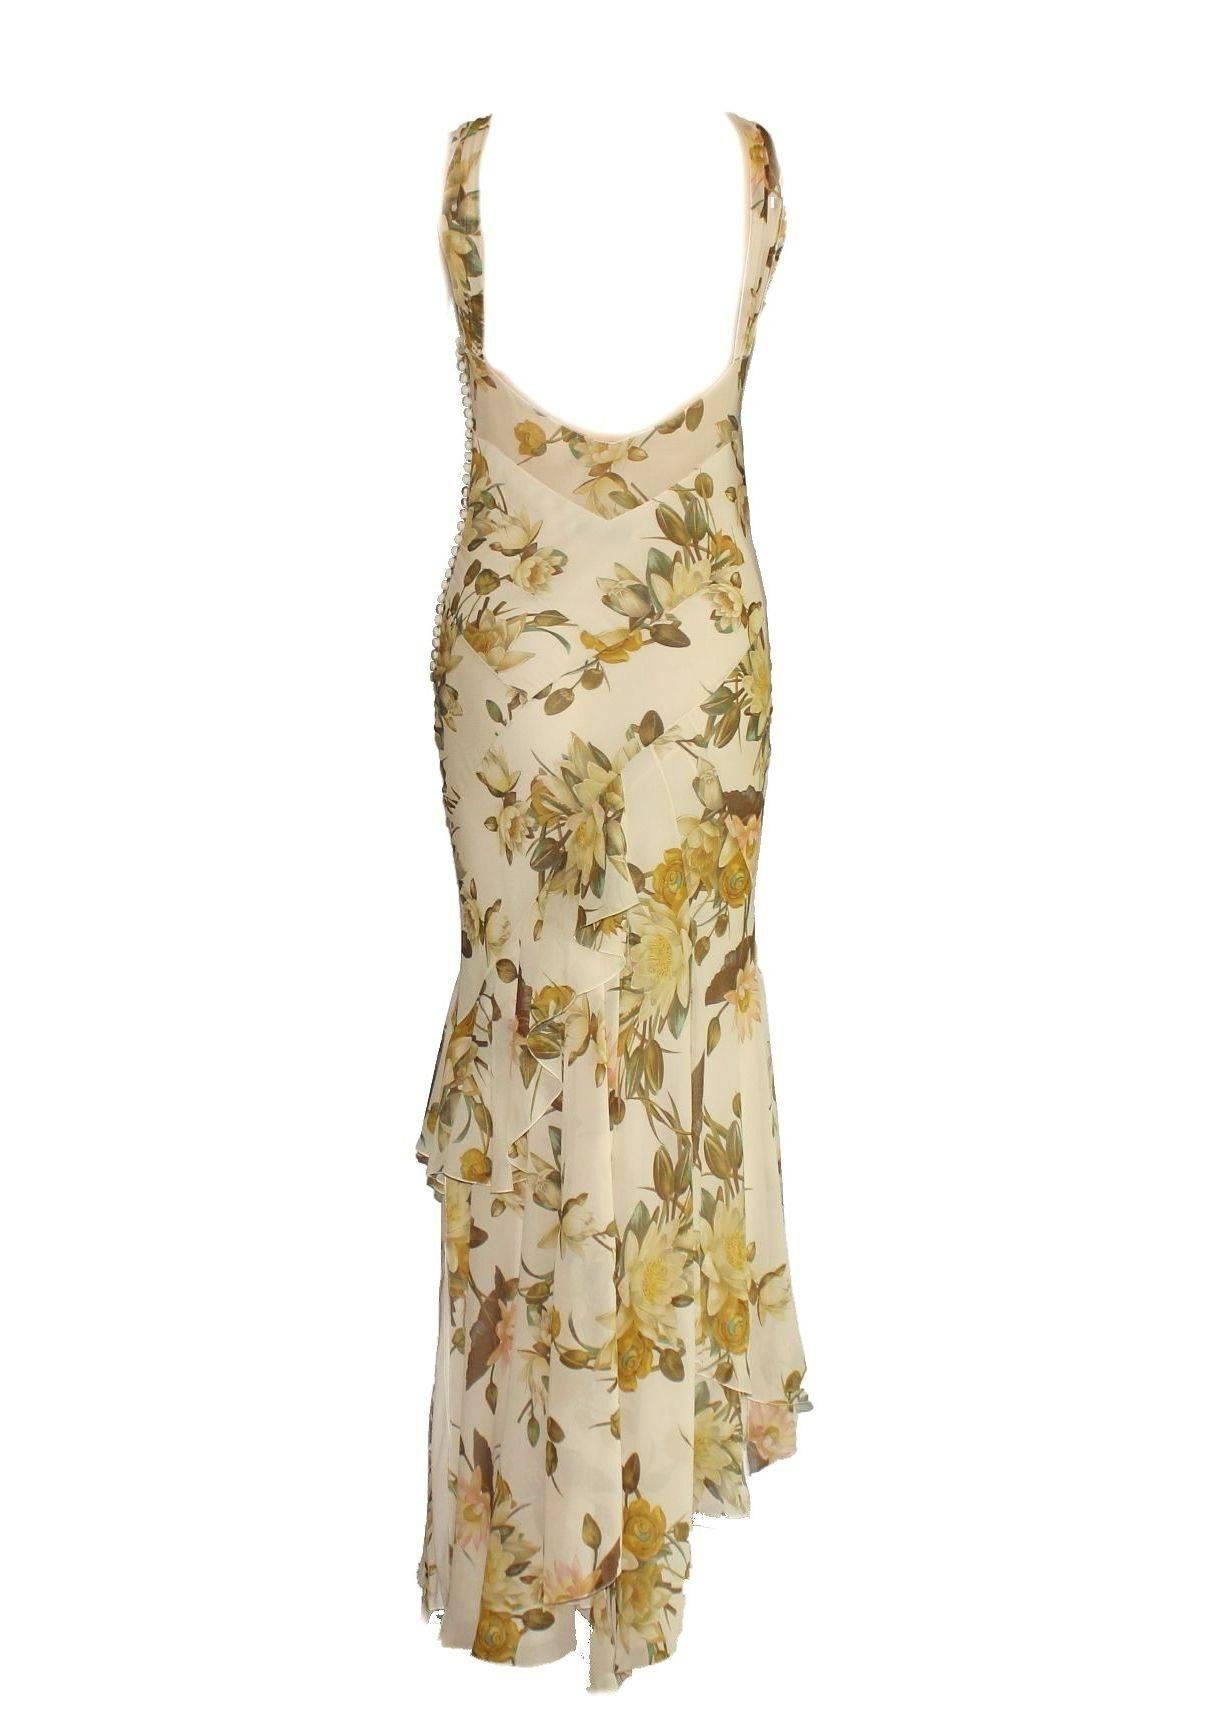 Beige Christian Dior Floral Silk Evening Dress Gown with Matching Silk Stola Shawl 